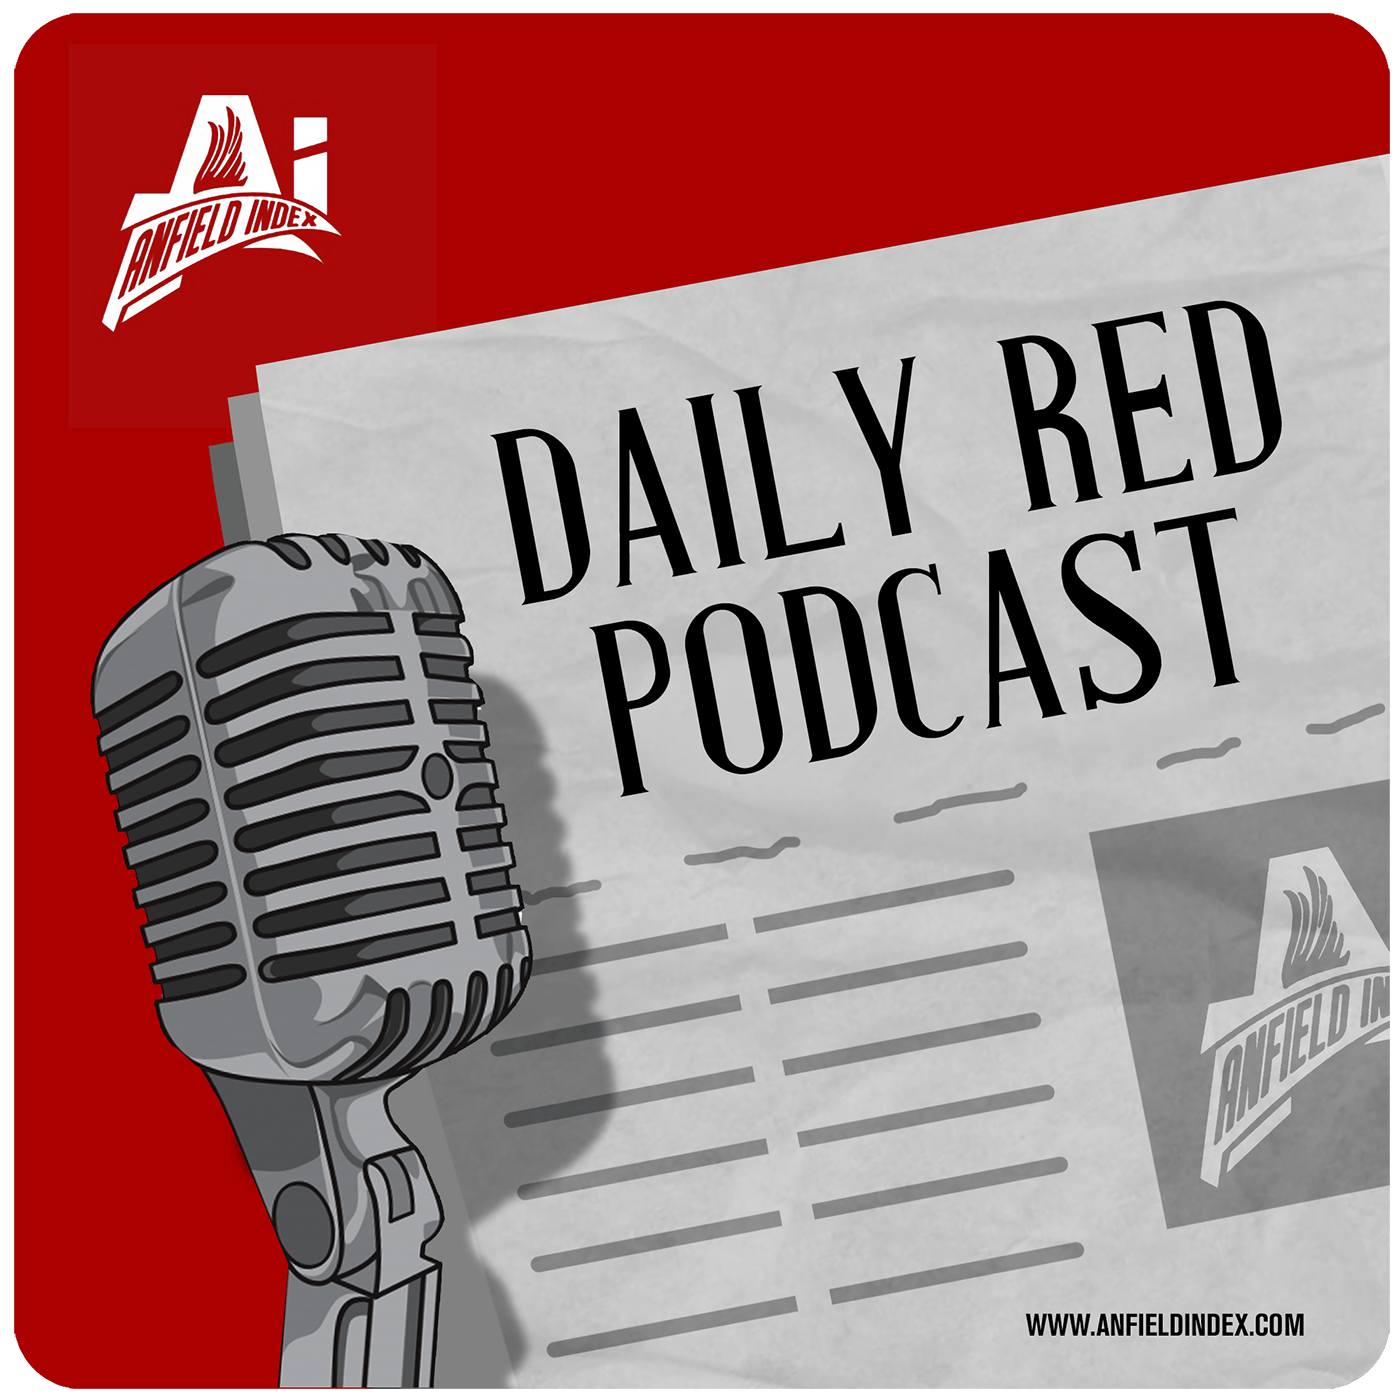 Everton Embarrassment - Daily Red Podcast